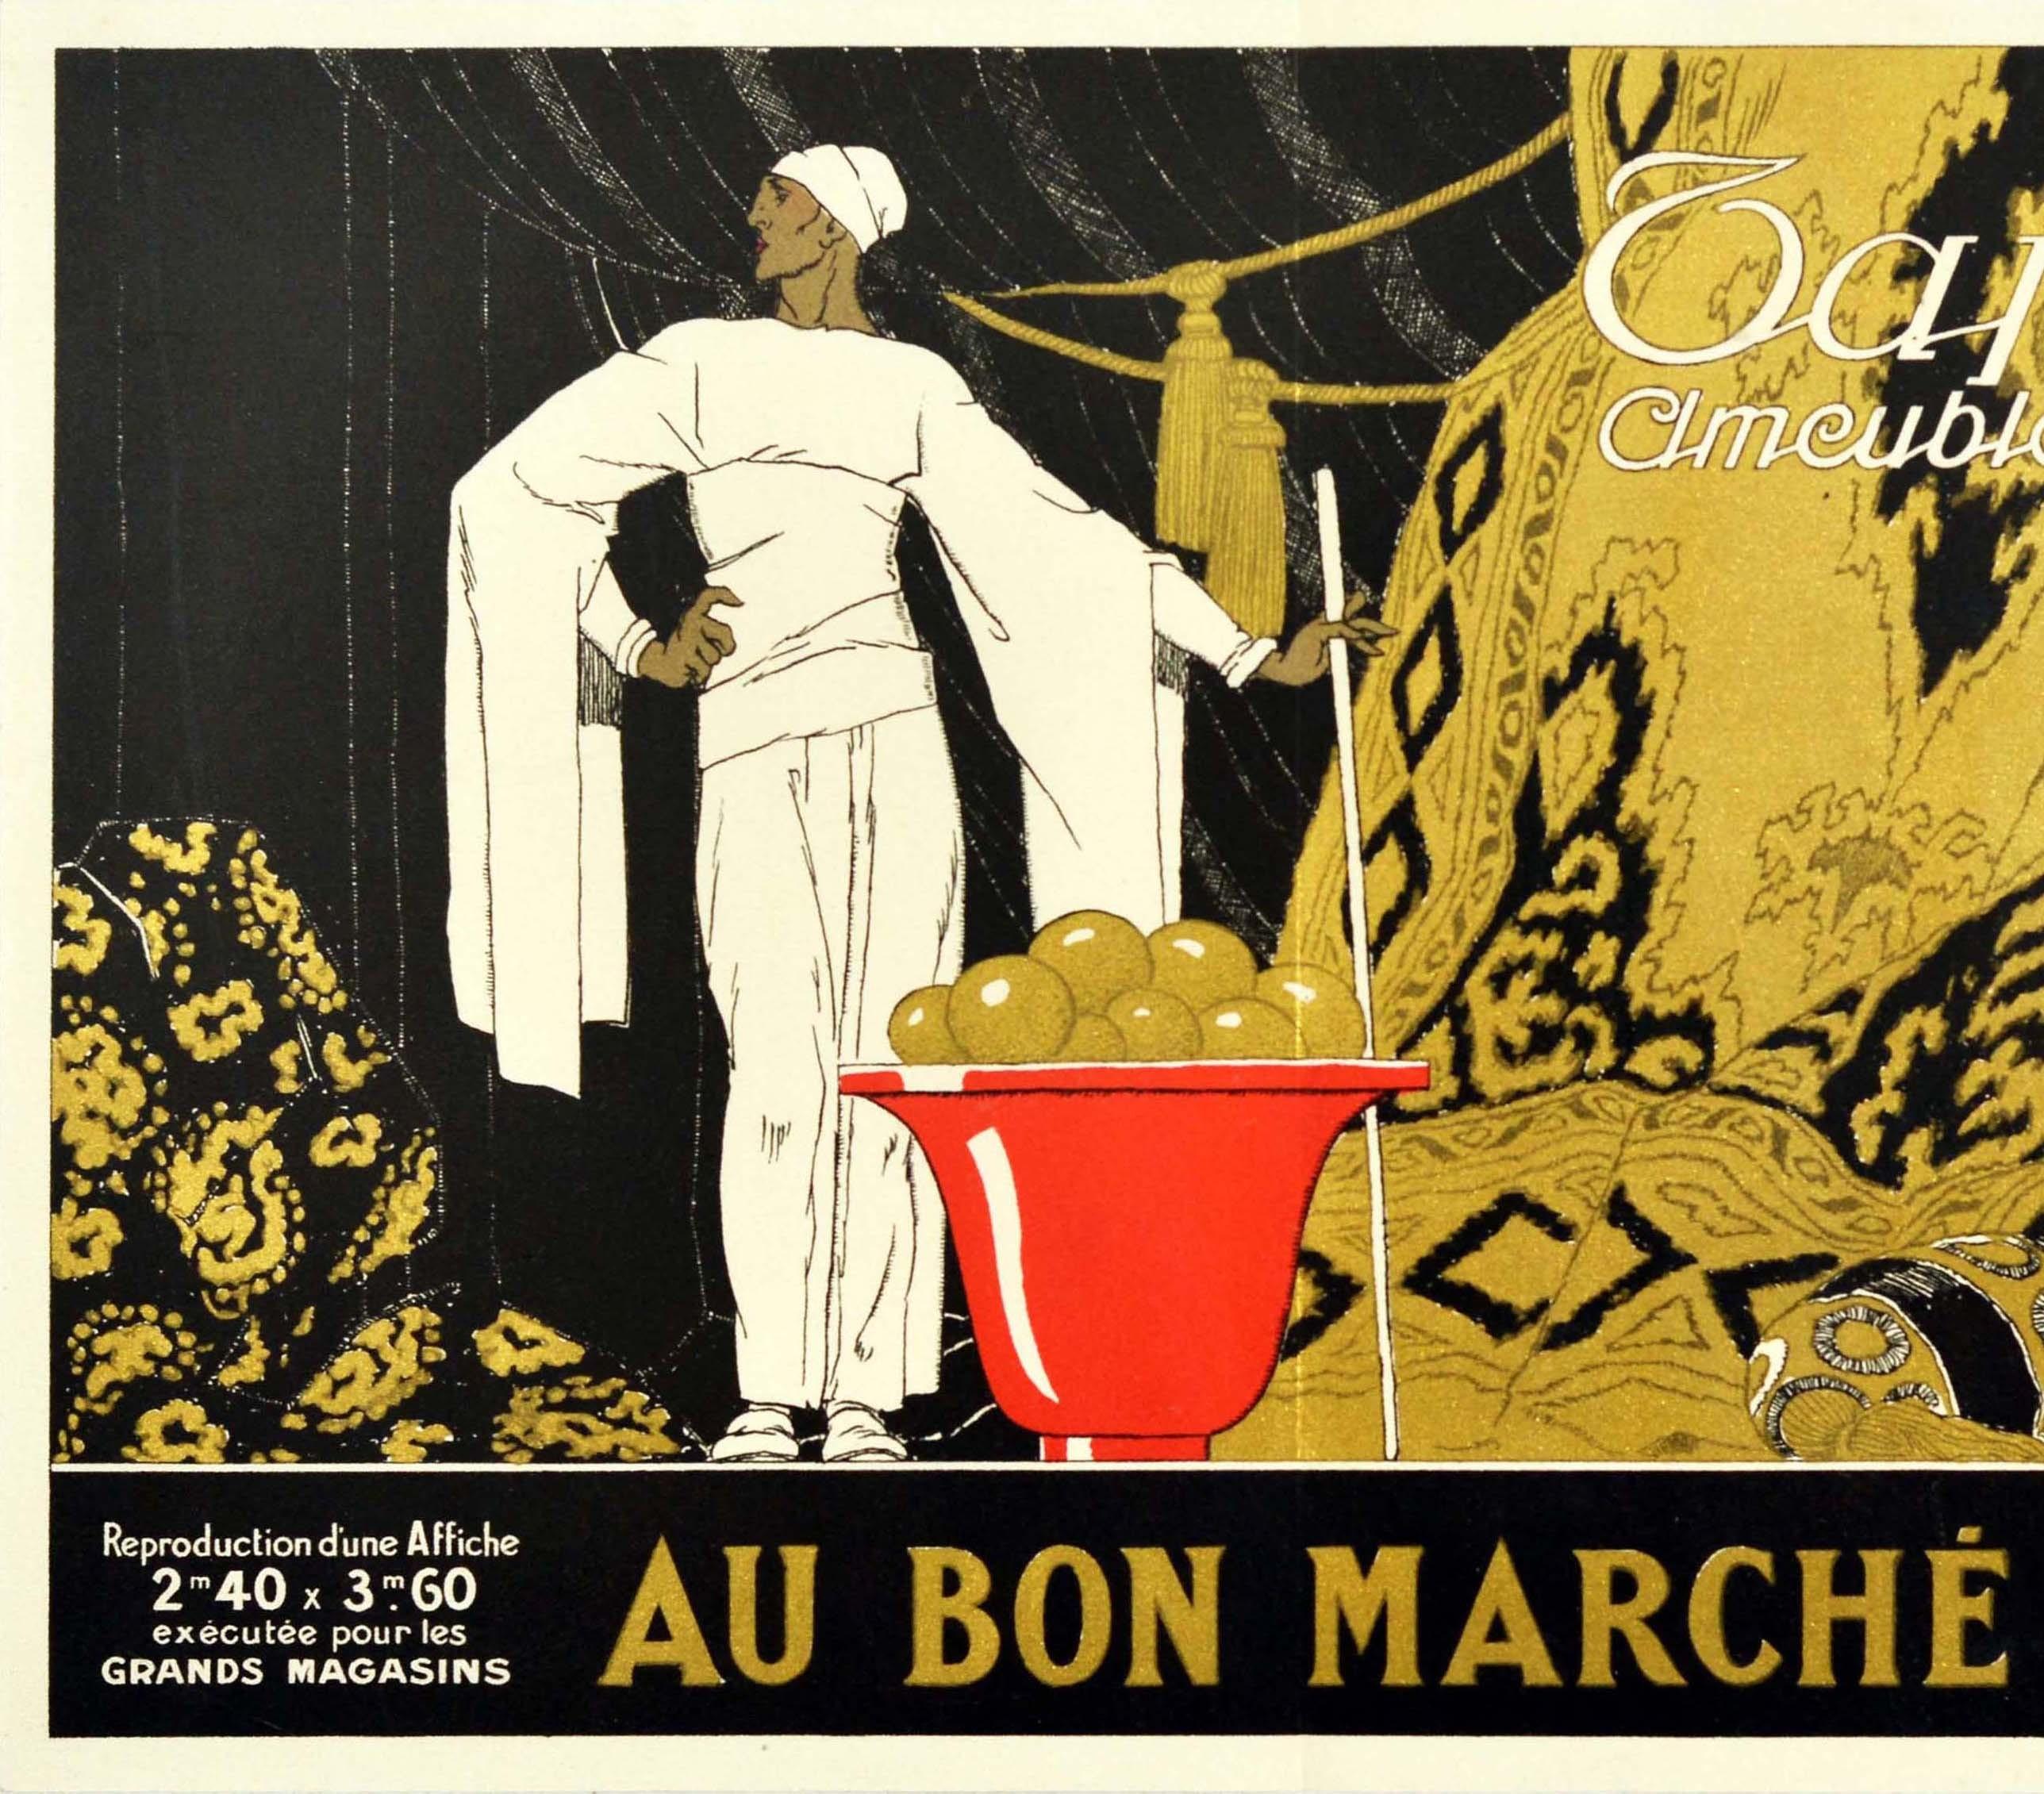 Original vintage advertising poster for Le Bon Marche department store in Paris designed by the influential French Art Deco illustrator Rene Vincent (1879-1936) promoting the home furnishings department featuring a man in white with flowing sleeves